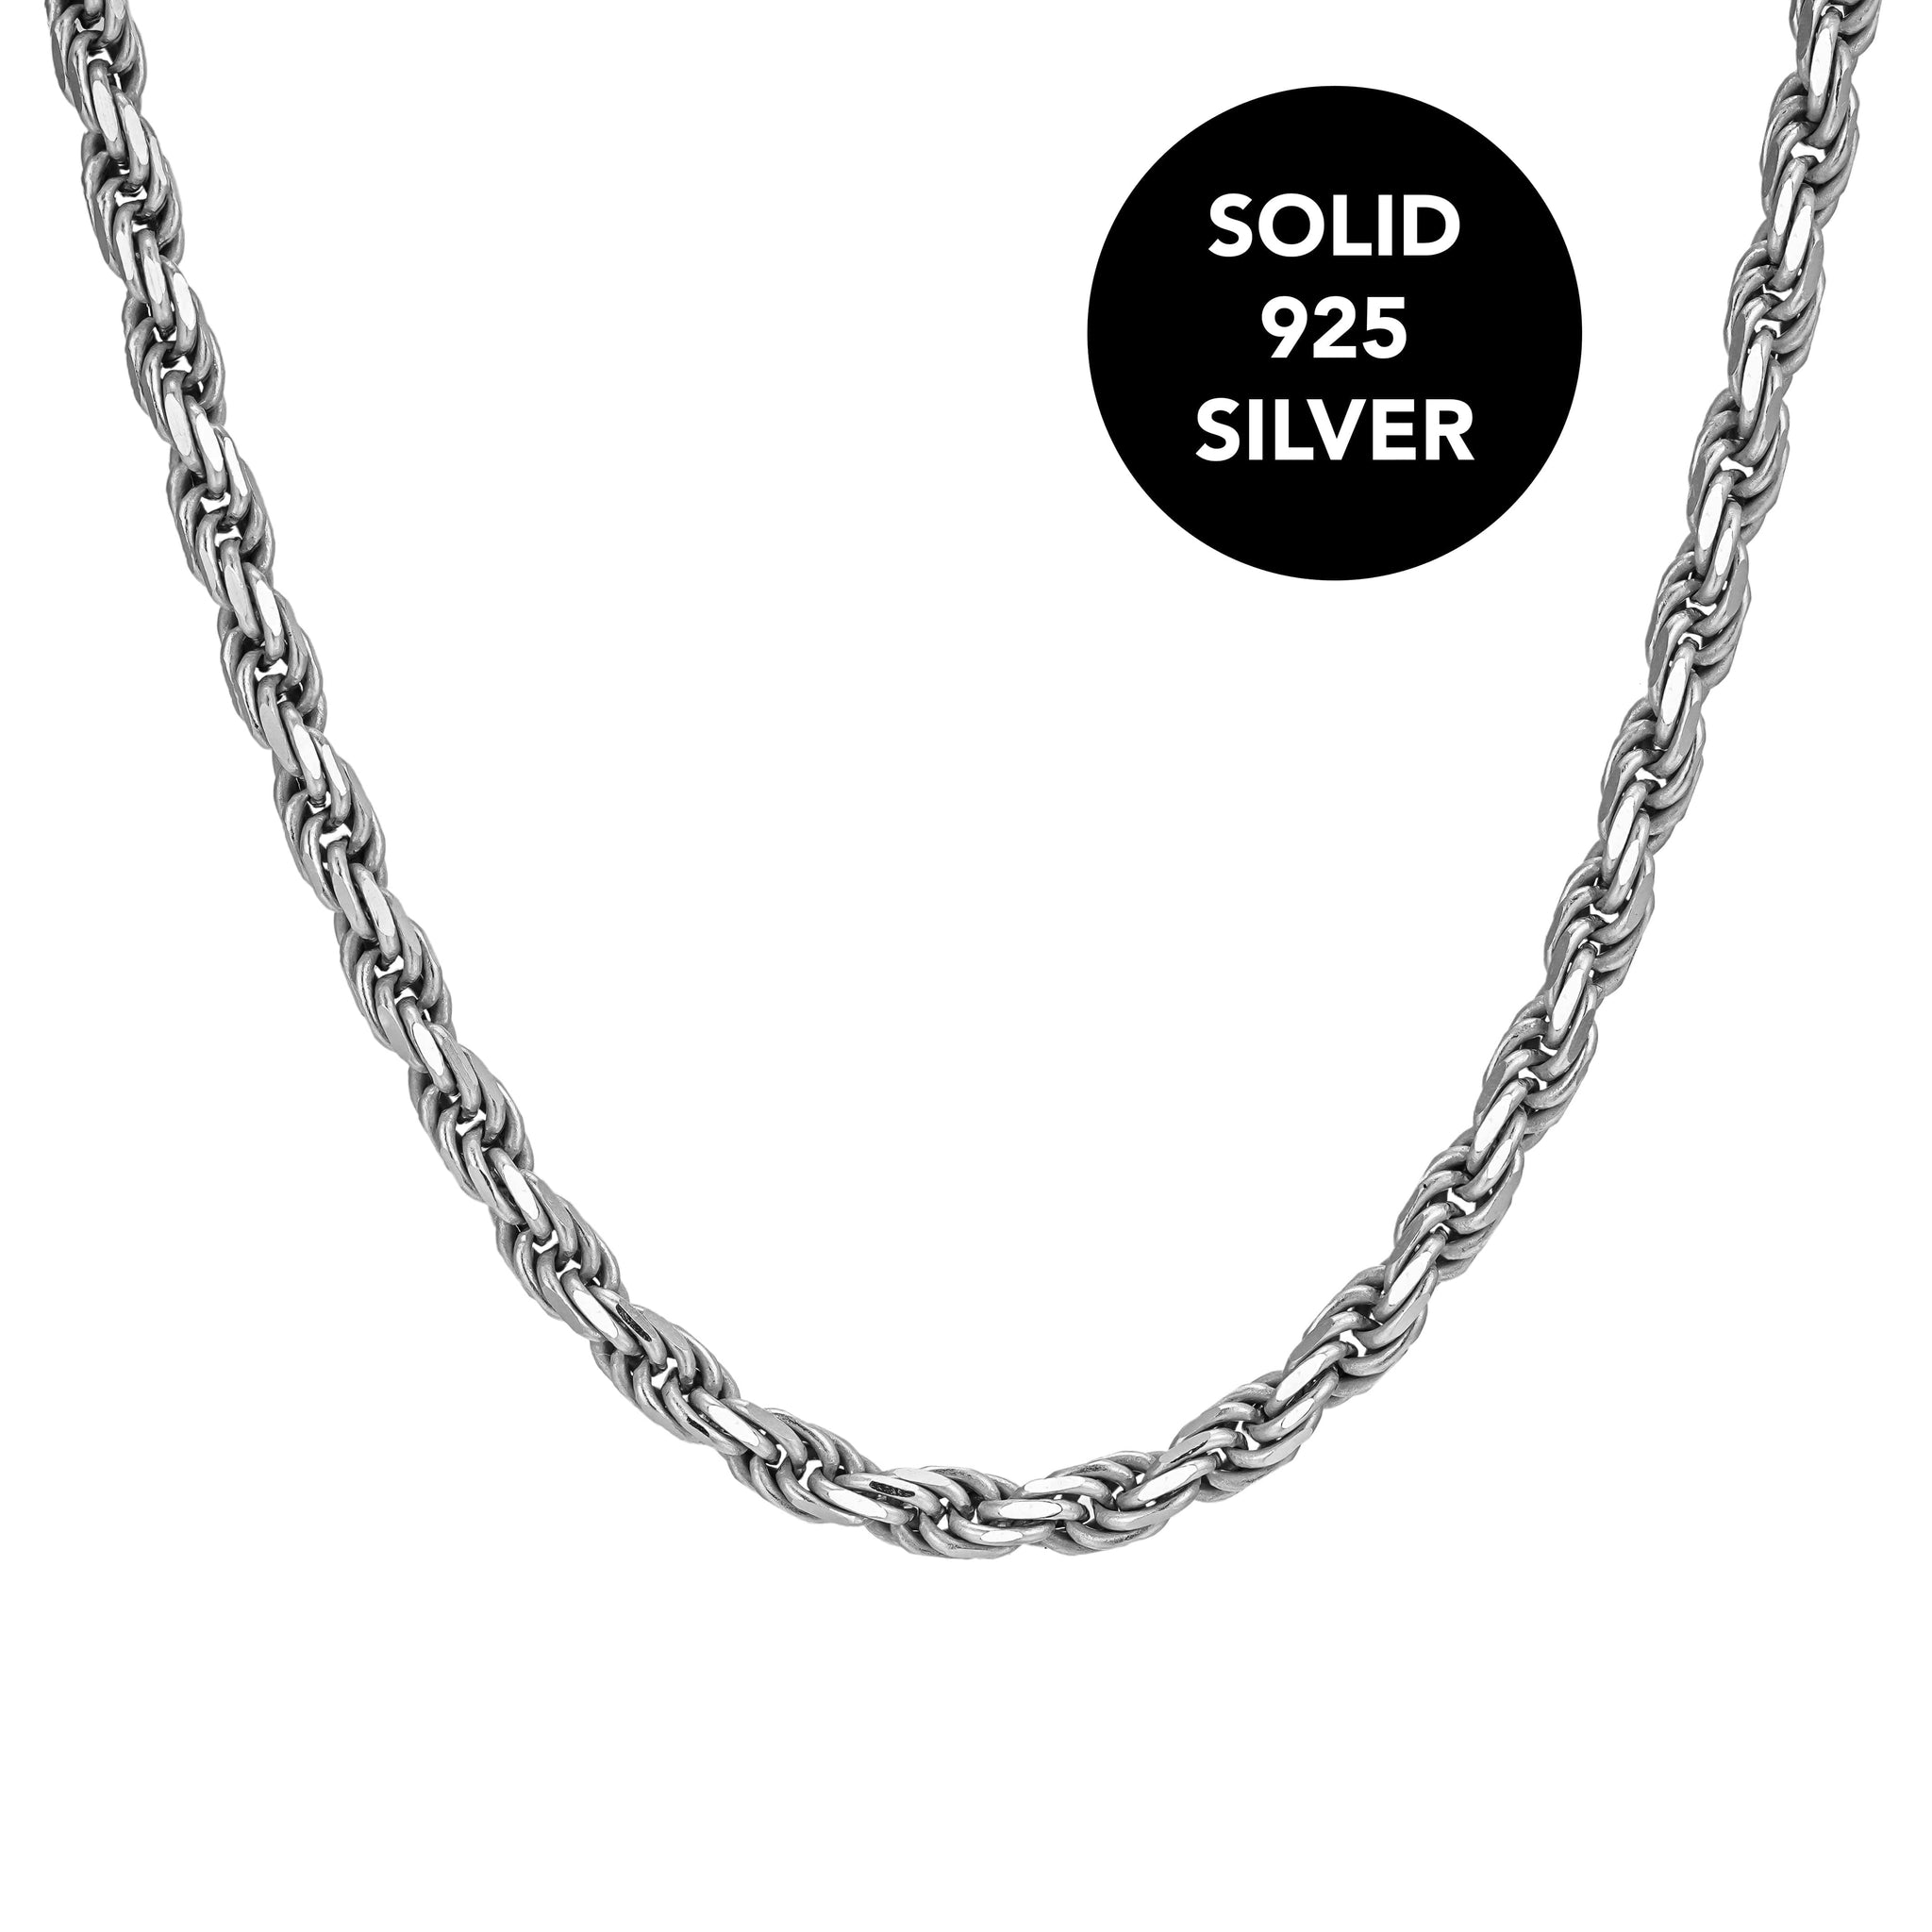 Rope Chain 4mm - Silver